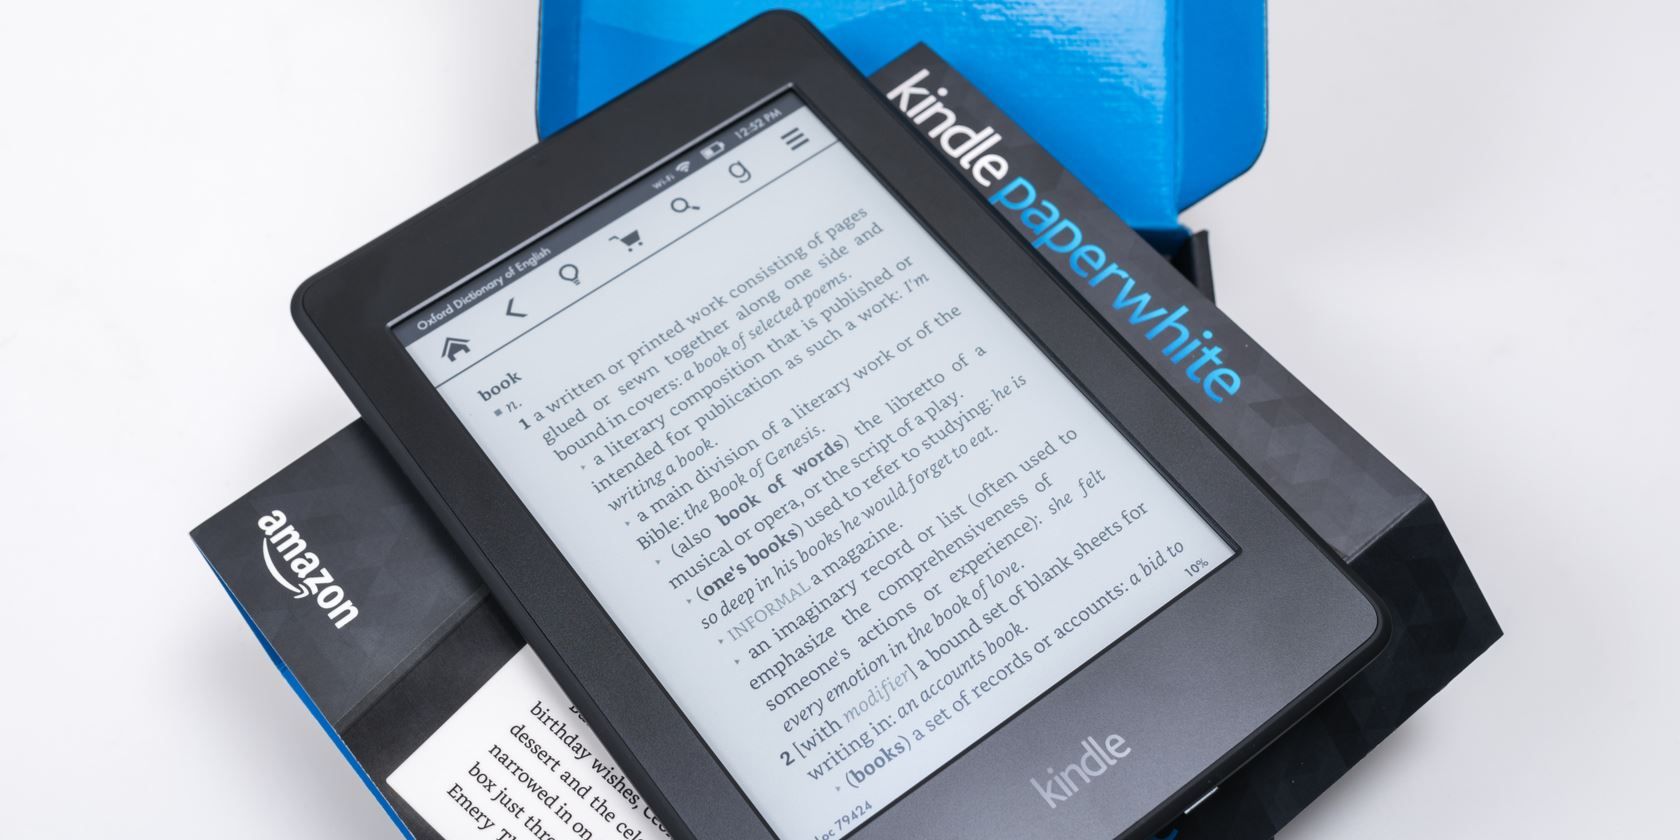 download ebooks to kindle paperwhite